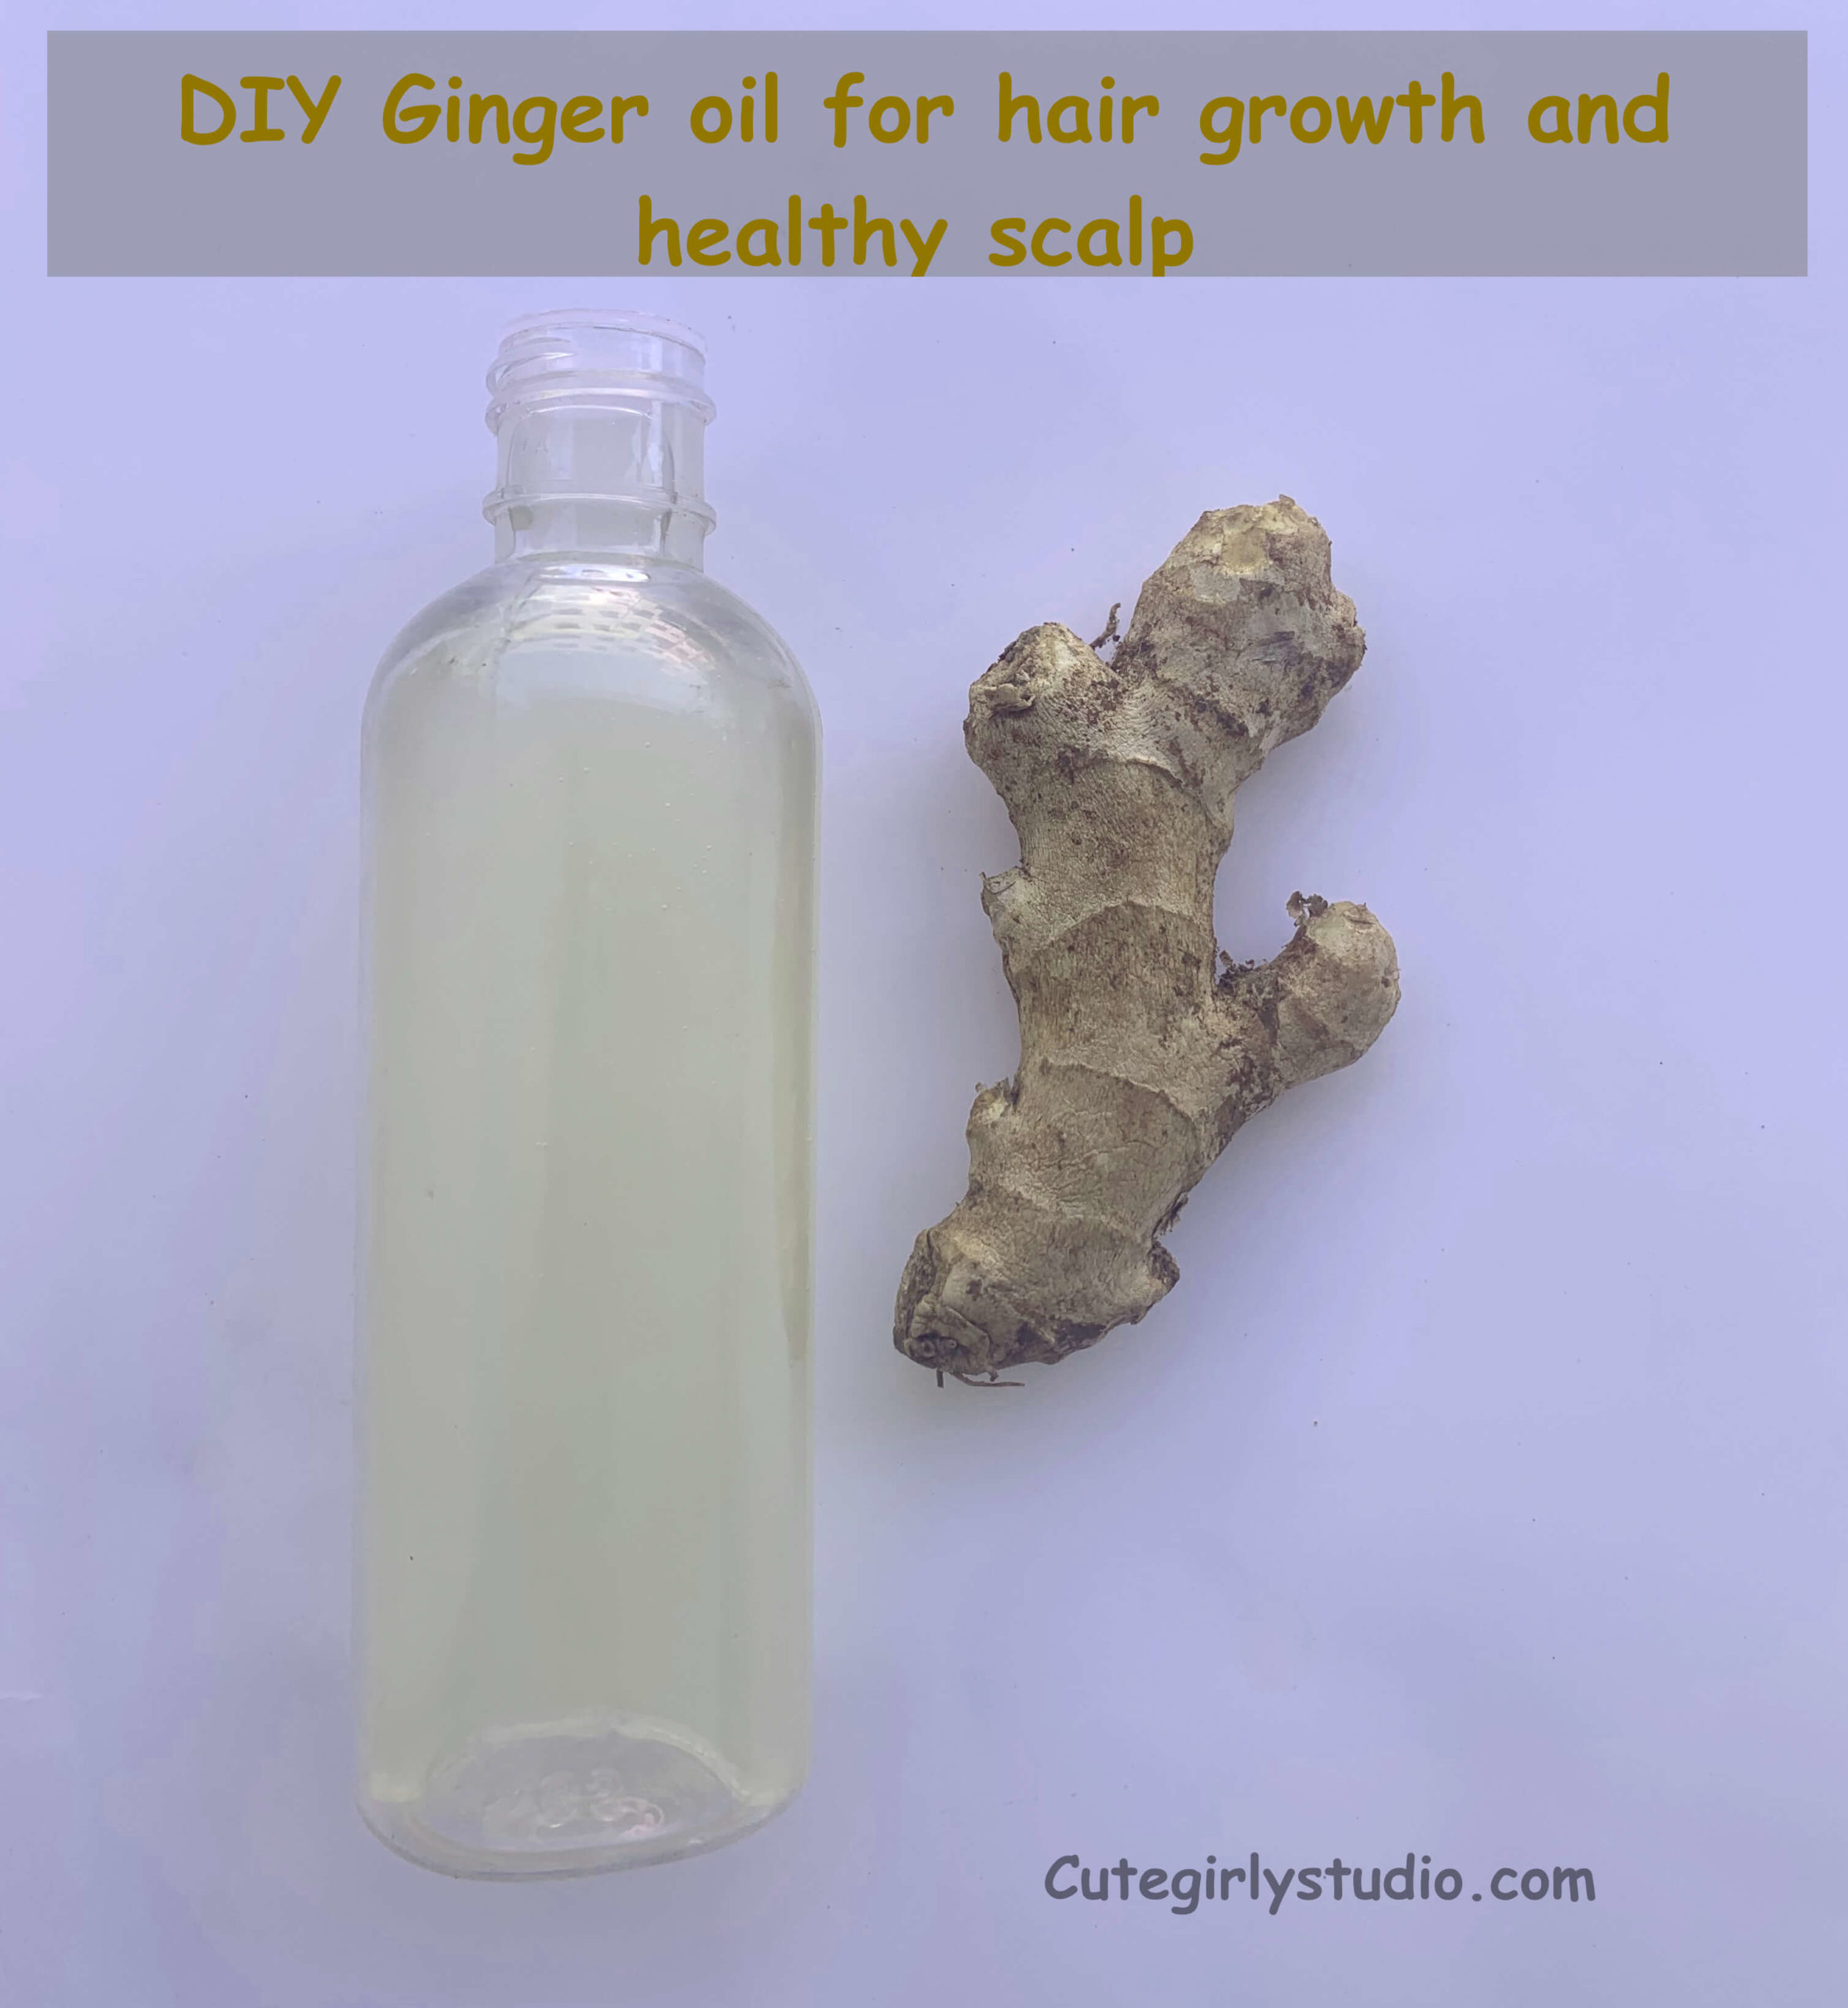 DIY Ginger oil for hair growth and healthy scalp featured